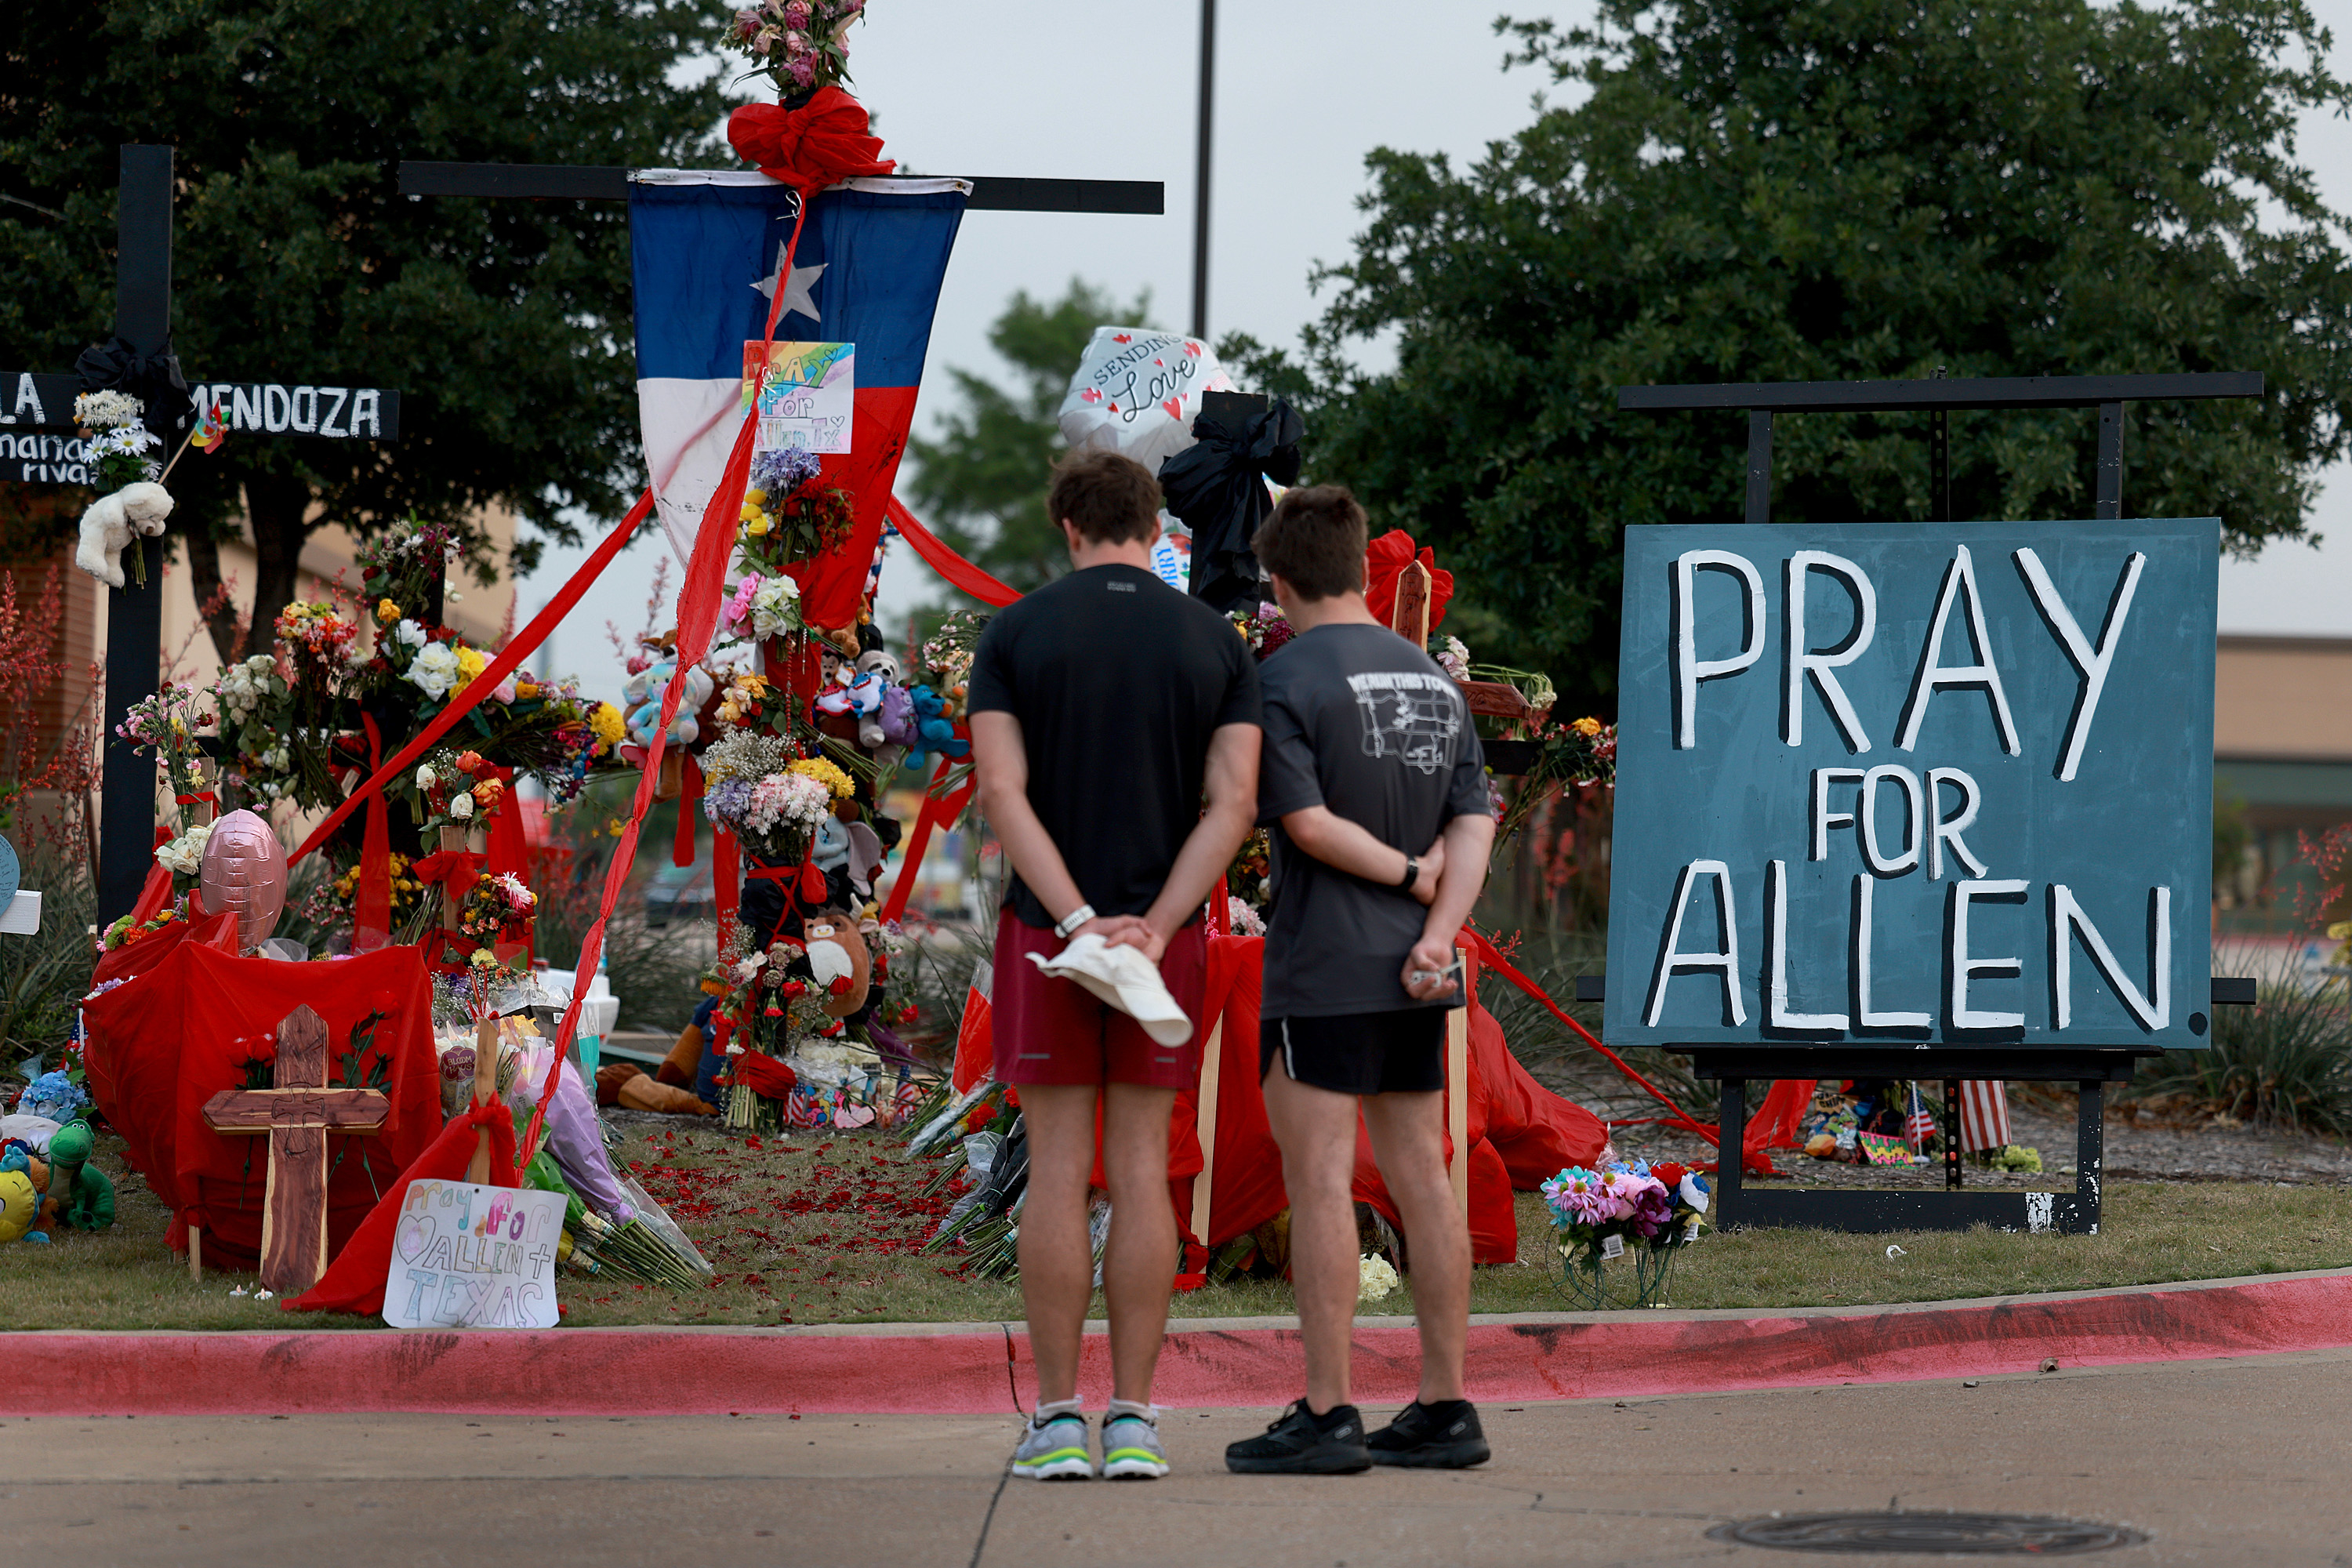 People at a memorial site for victims of the Allen mall shooting